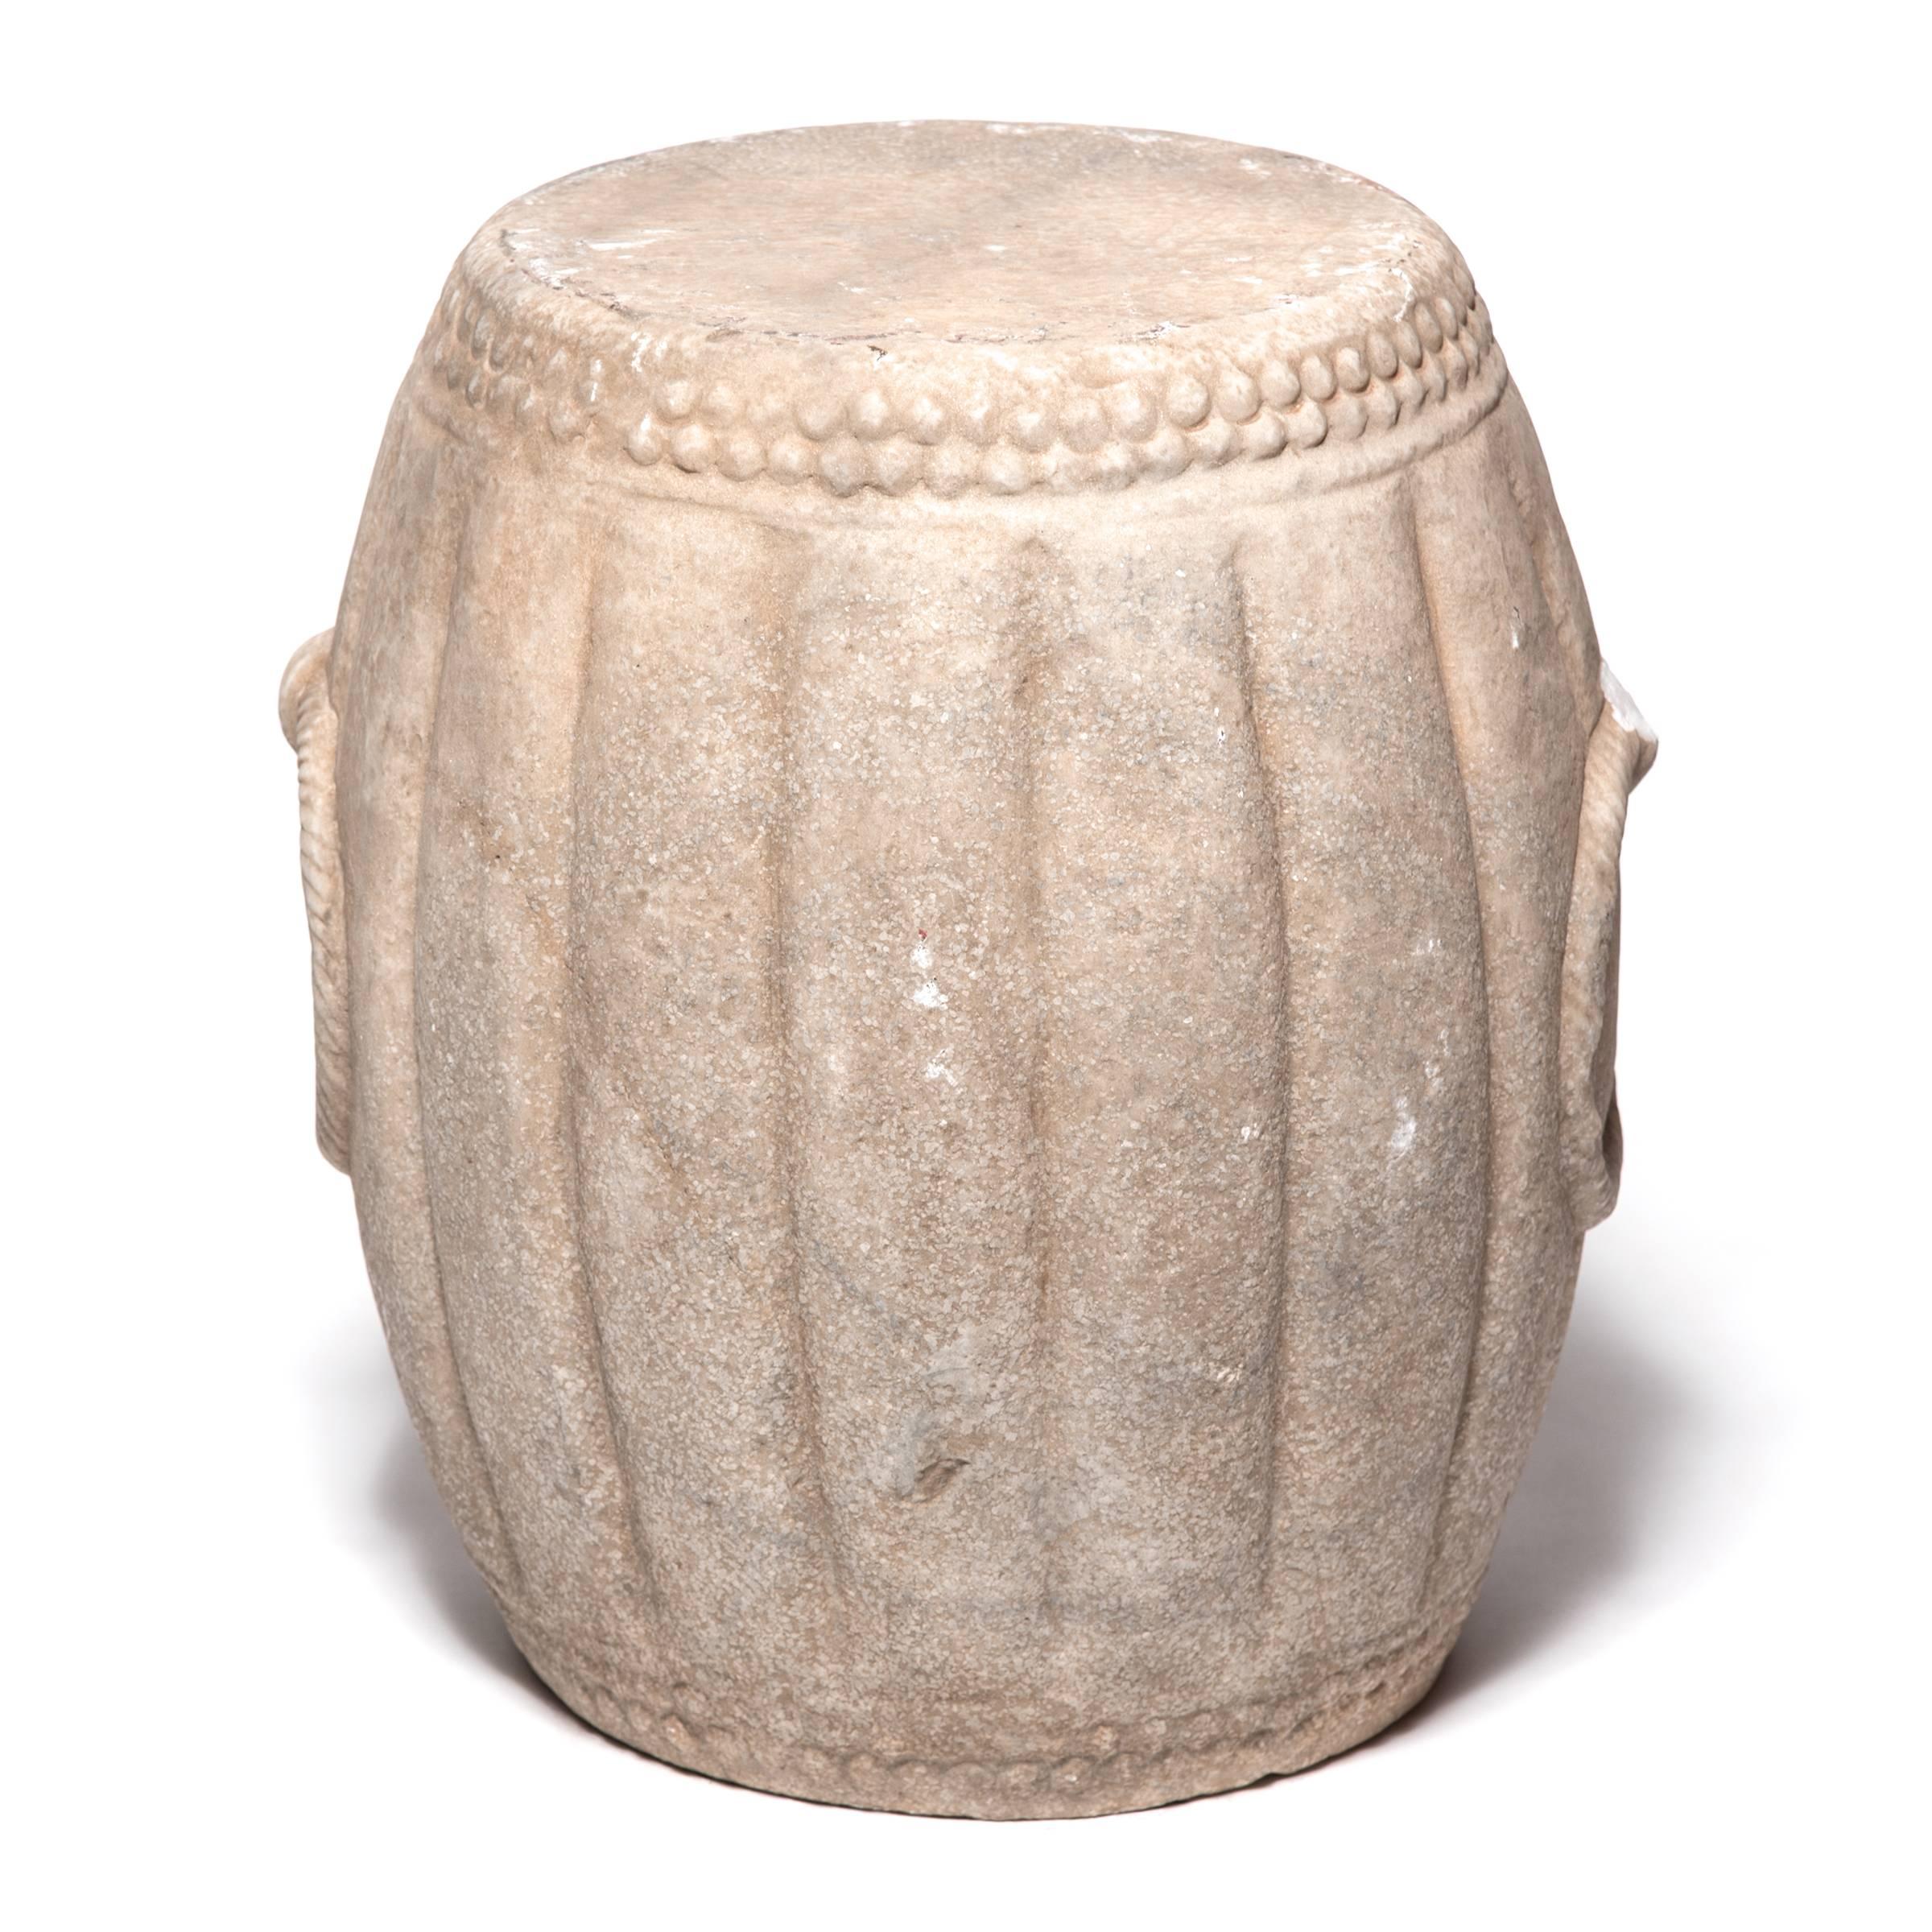 Hand-carved of marble, this drum-shaped stool swells a ribbed melon shape, an ancient symbol of fertility. The artist used a hobnail-like texture on either end to suggest the rivets that fastened the drum's stretched skin head and included